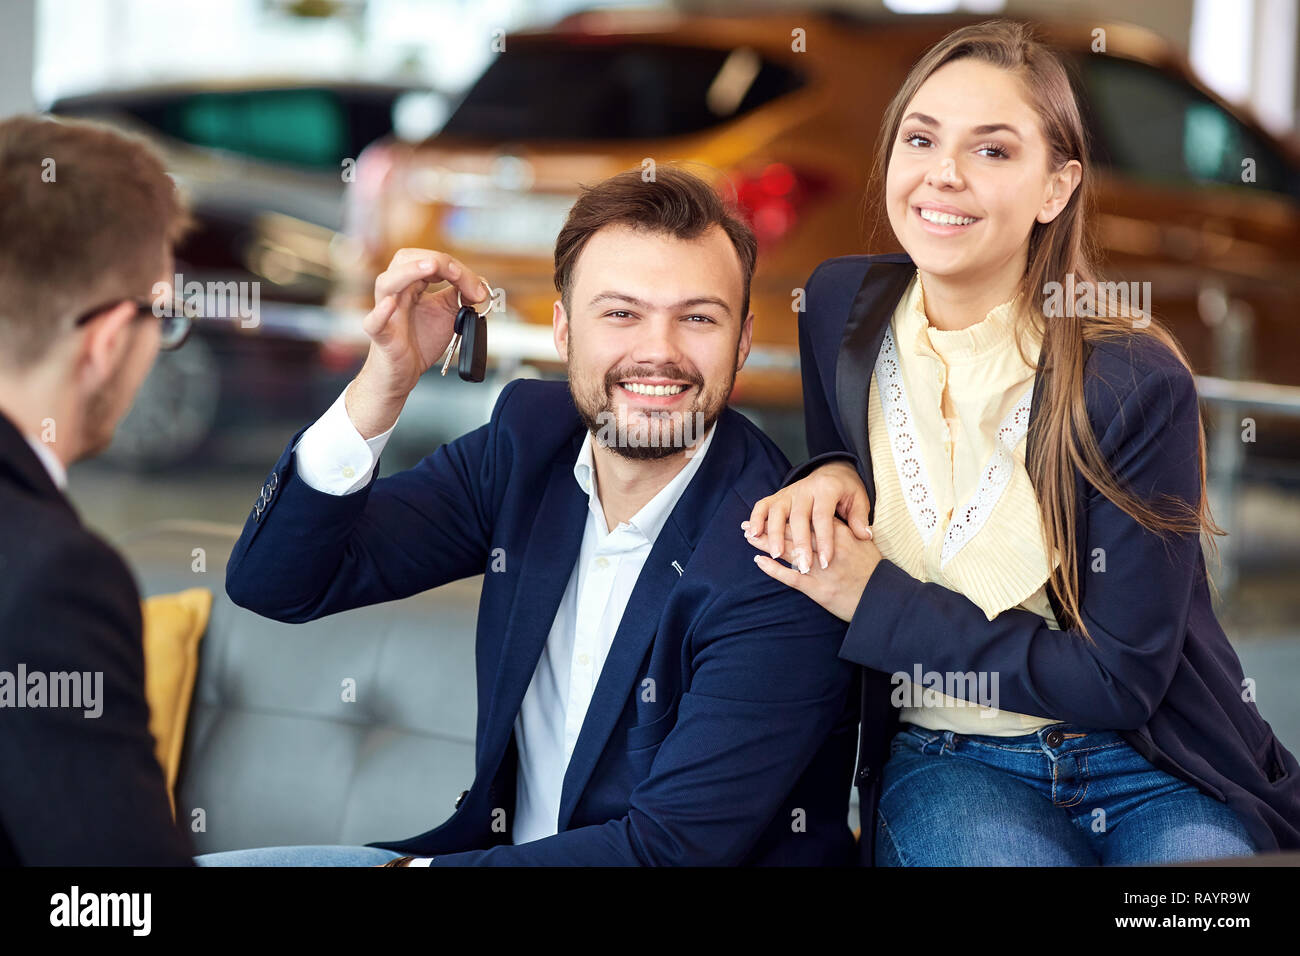 The dealer gives the keys to the new car to the customer Stock Photo